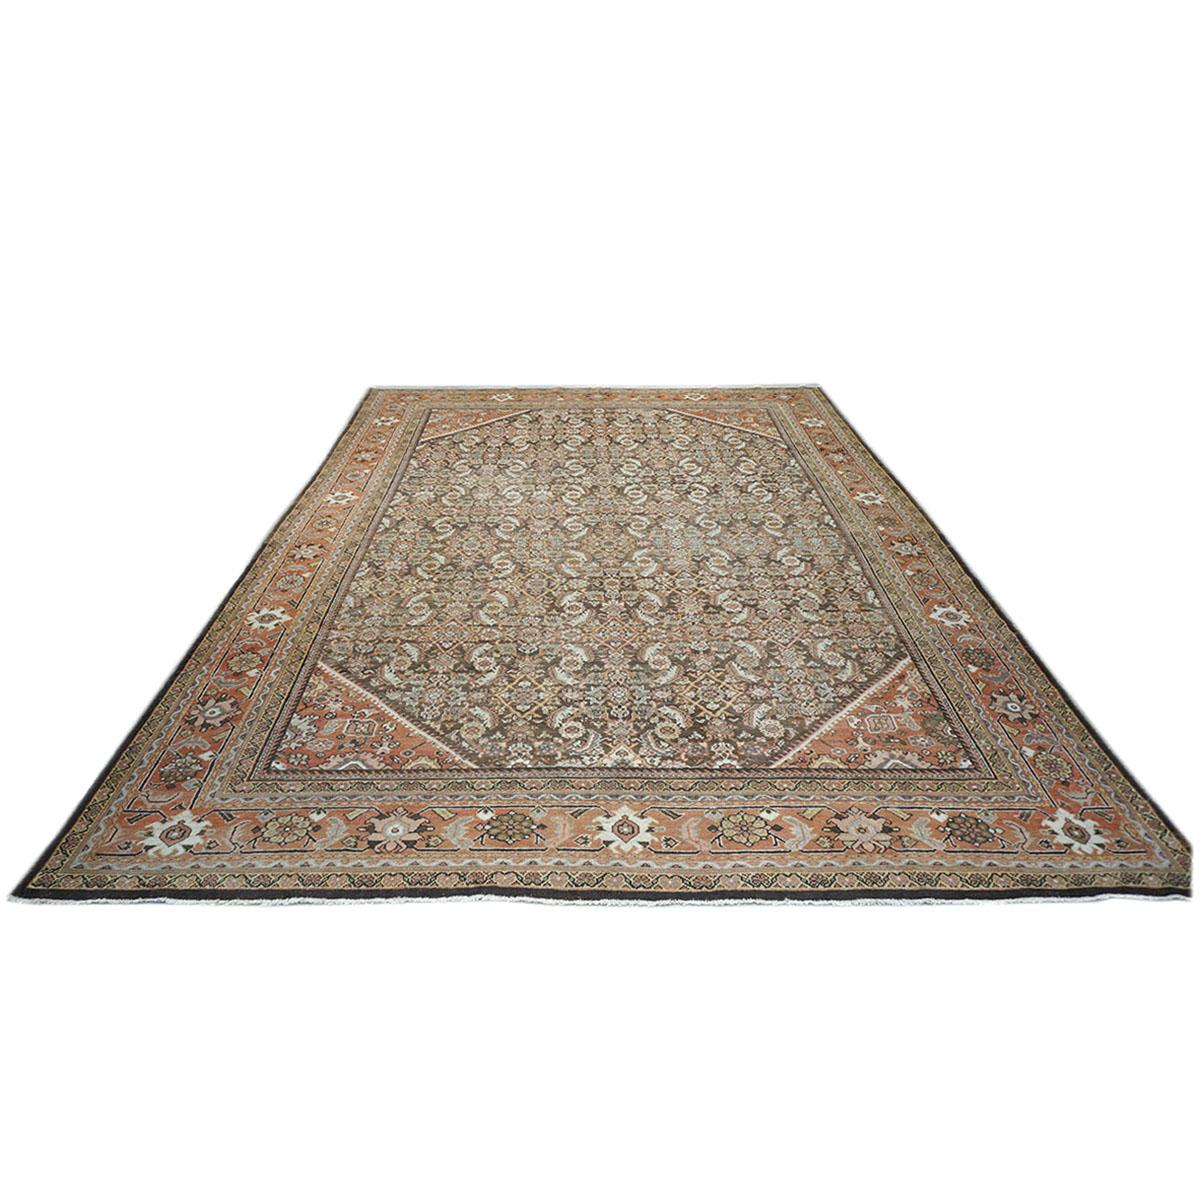 Ashly fine rugs presents a 20th century Antique Persian Sultanabad 10'5